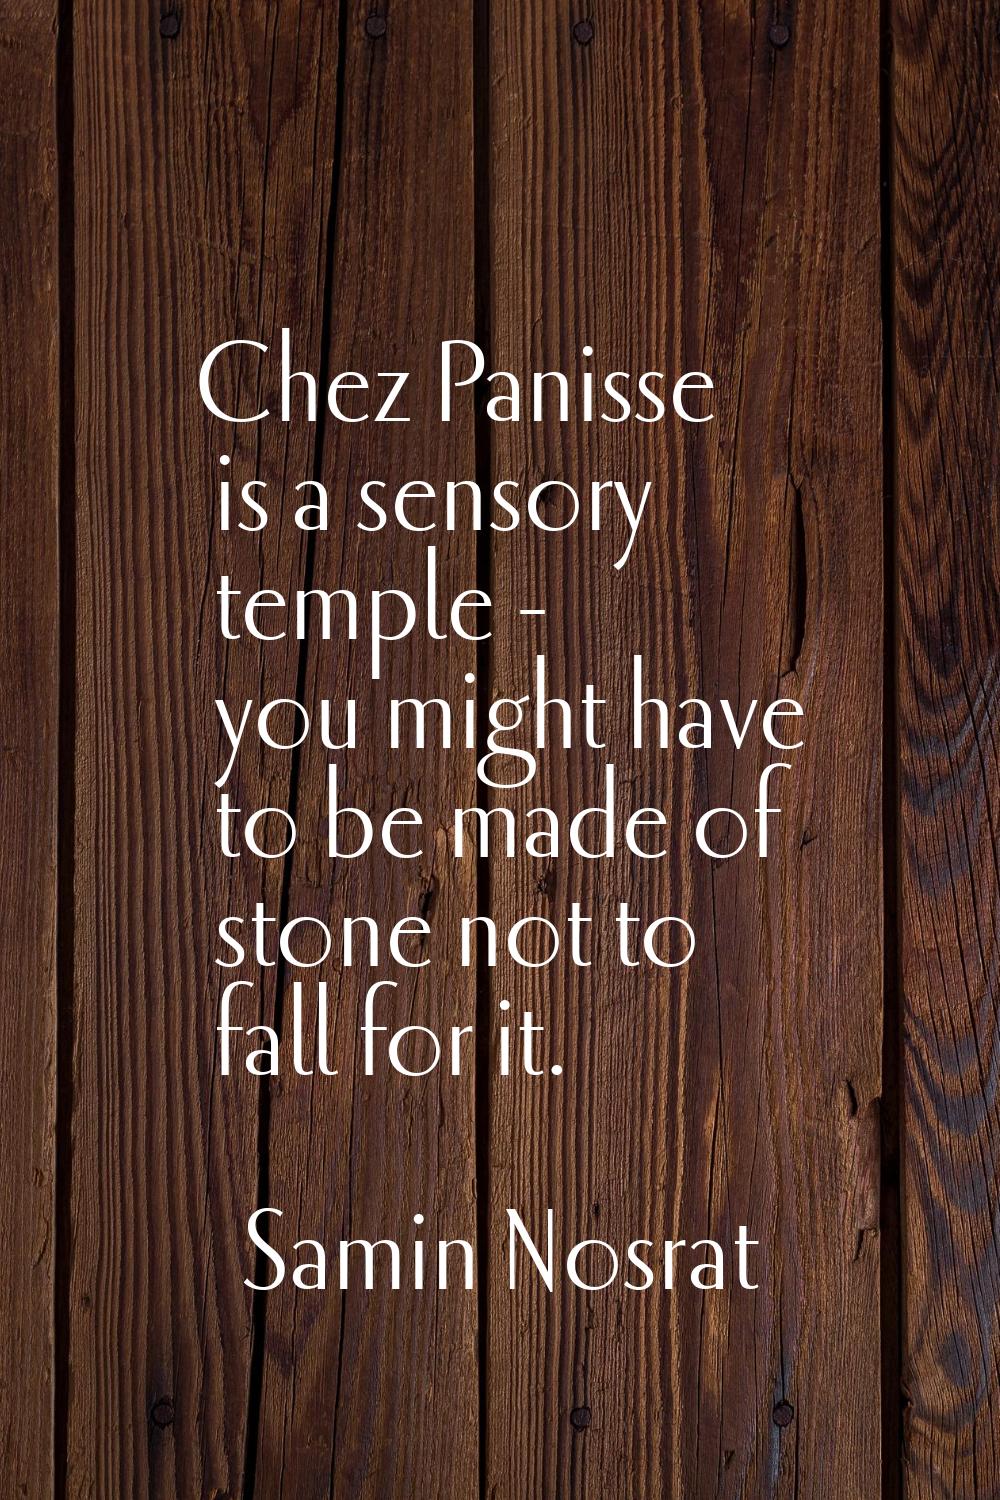 Chez Panisse is a sensory temple - you might have to be made of stone not to fall for it.